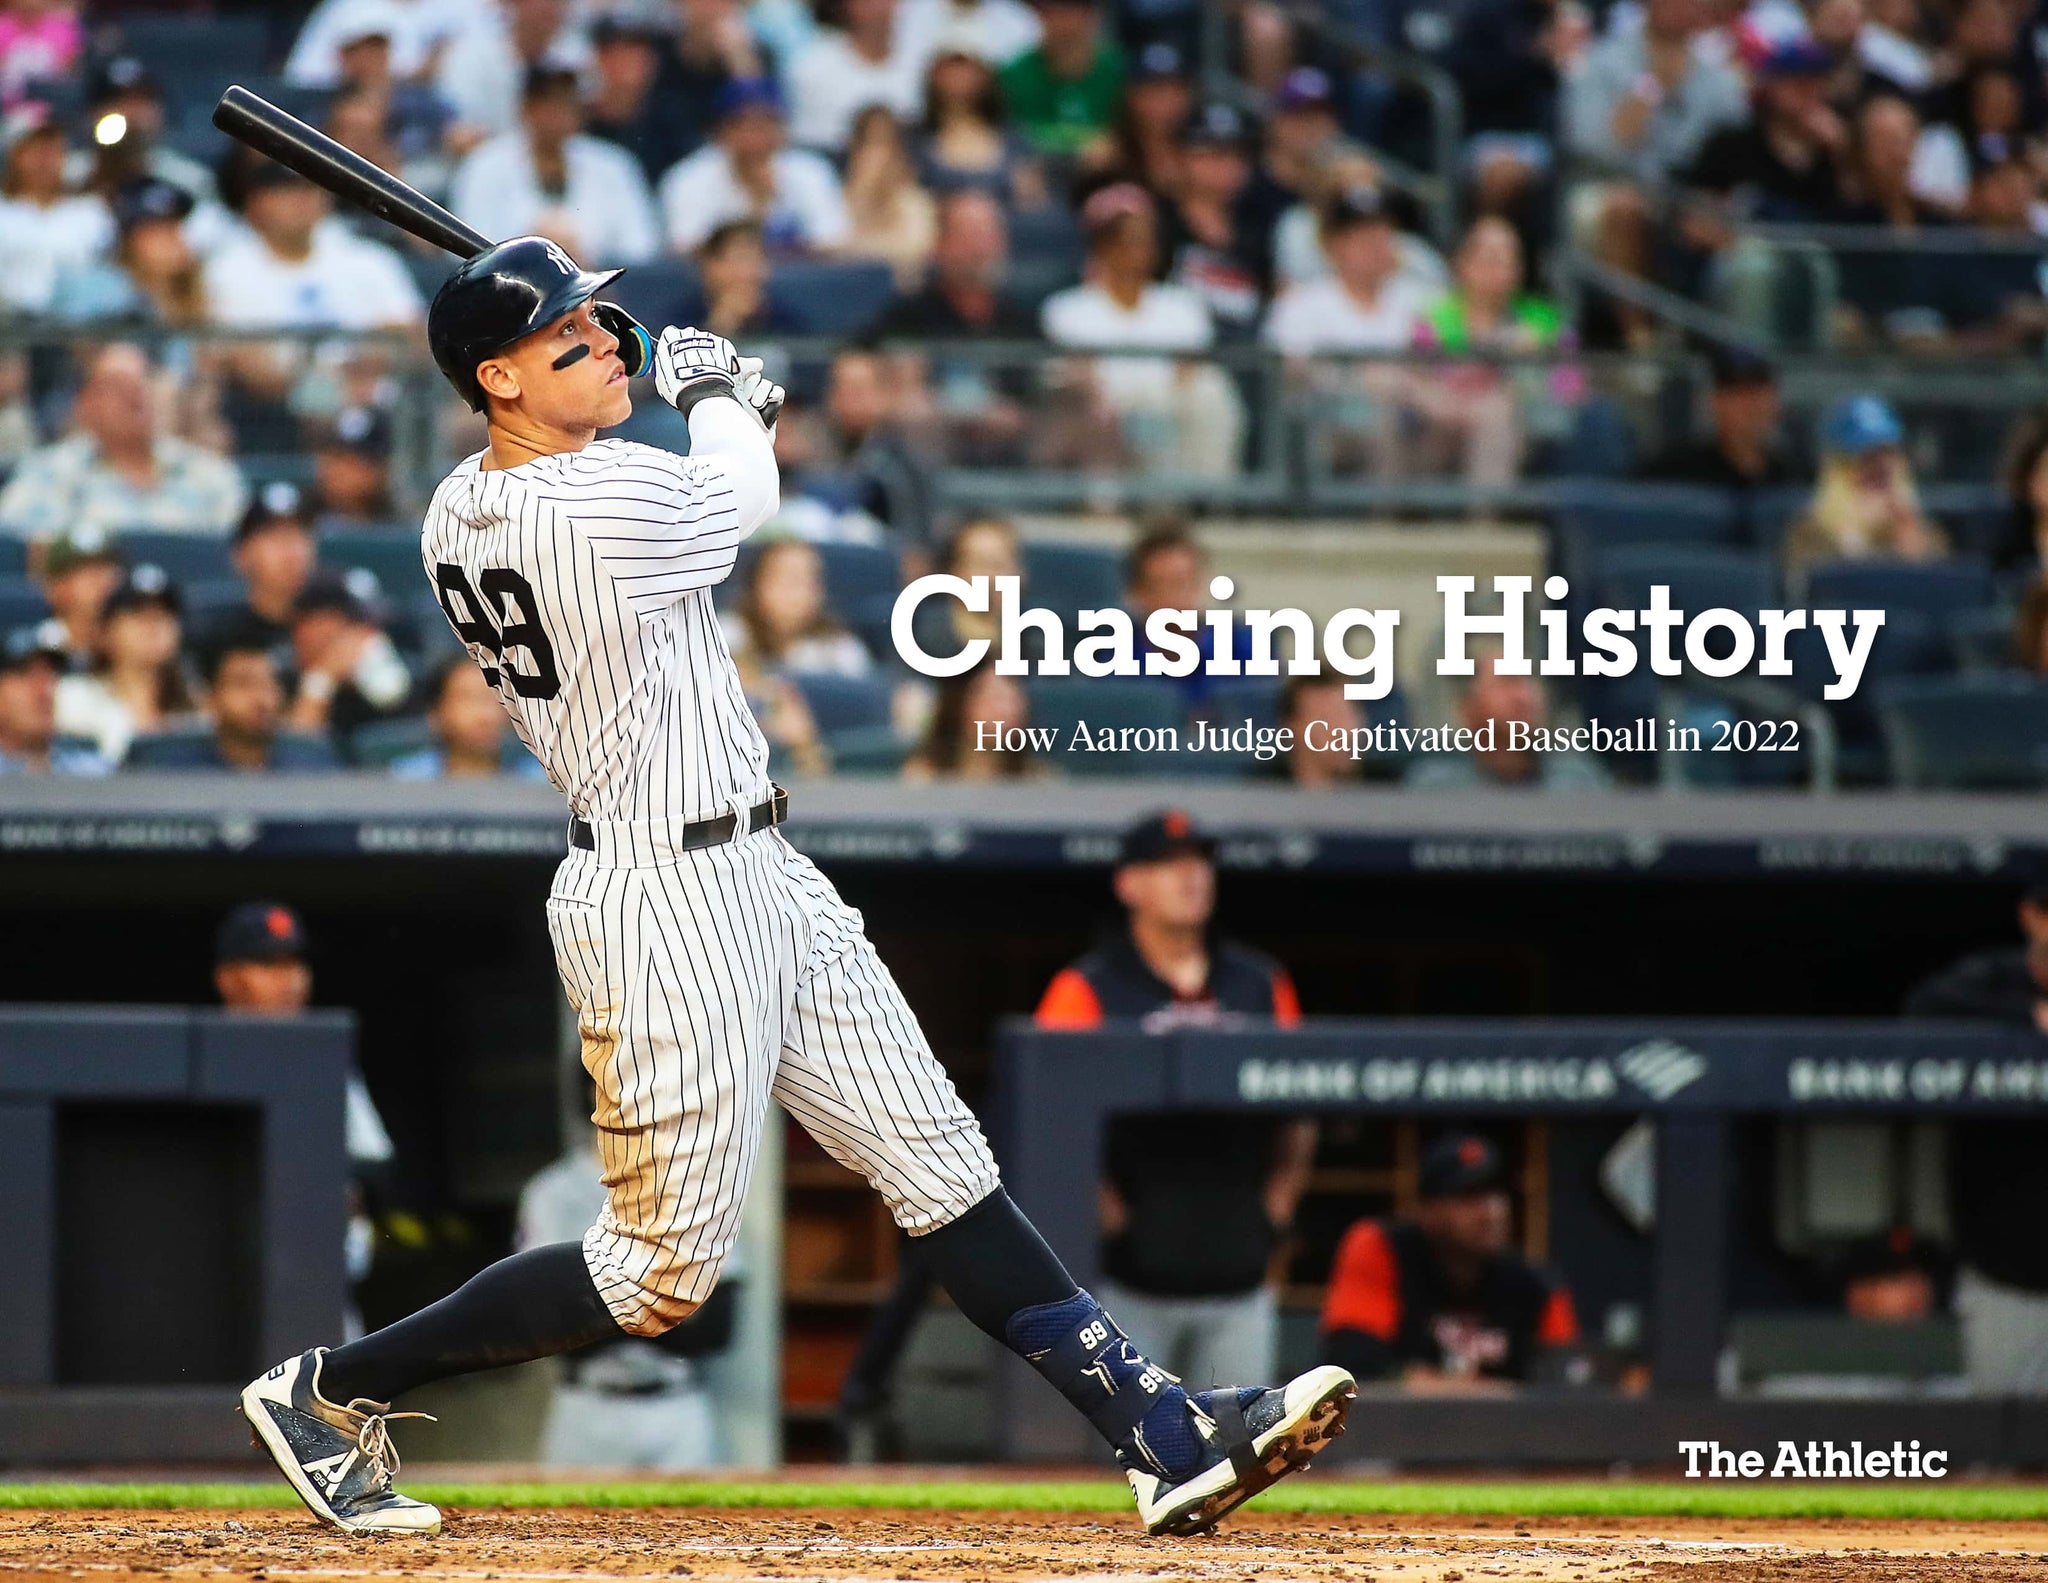 Aaron Judge's rookie exploits seem destined for the record books